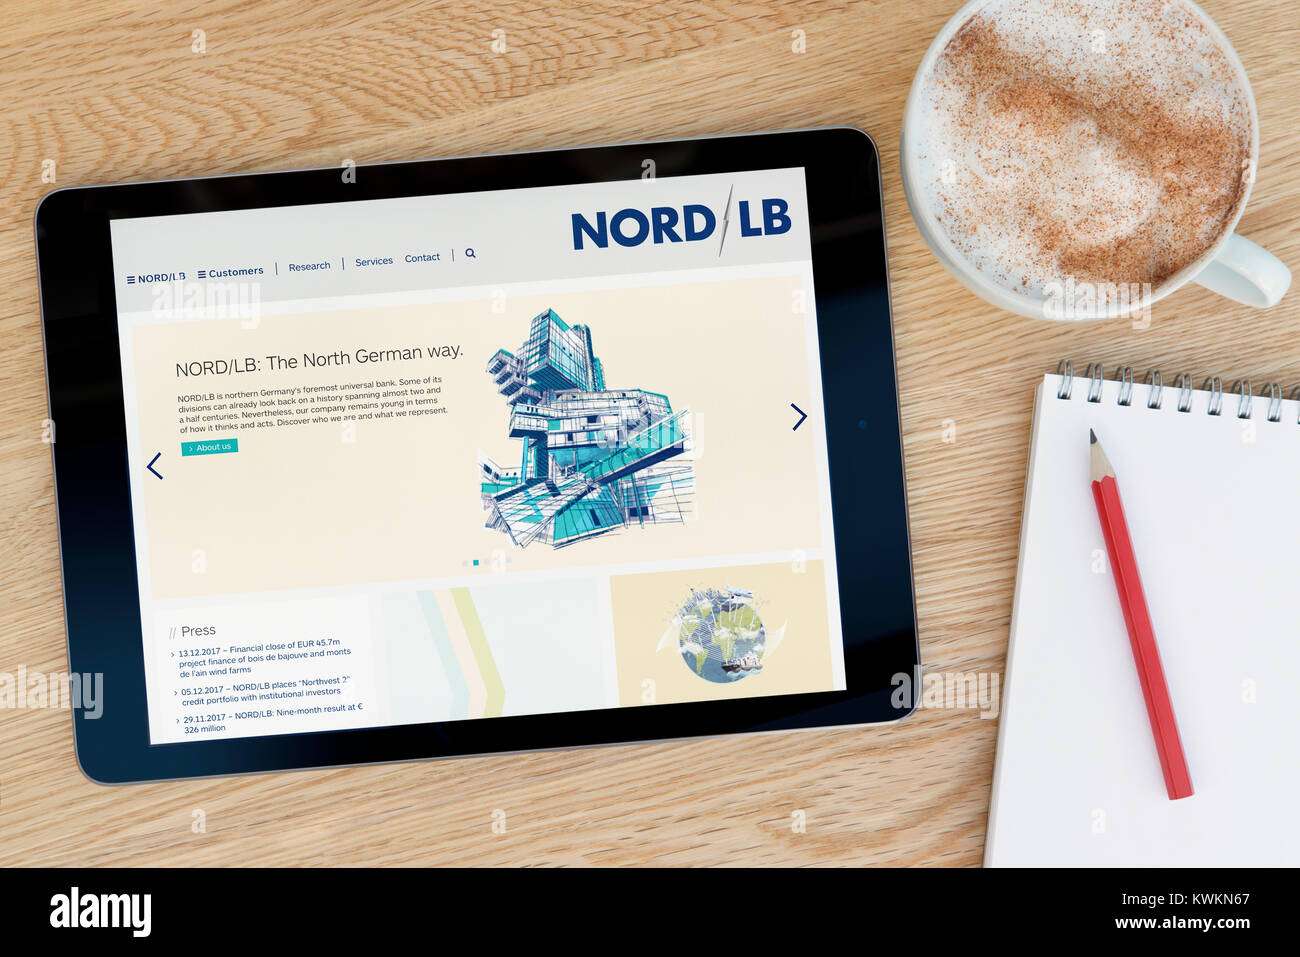 The Nord/LB website on an iPad tablet device, resting on a wooden table beside a notepad, pencil and cup of coffee (Editorial only) Stock Photo